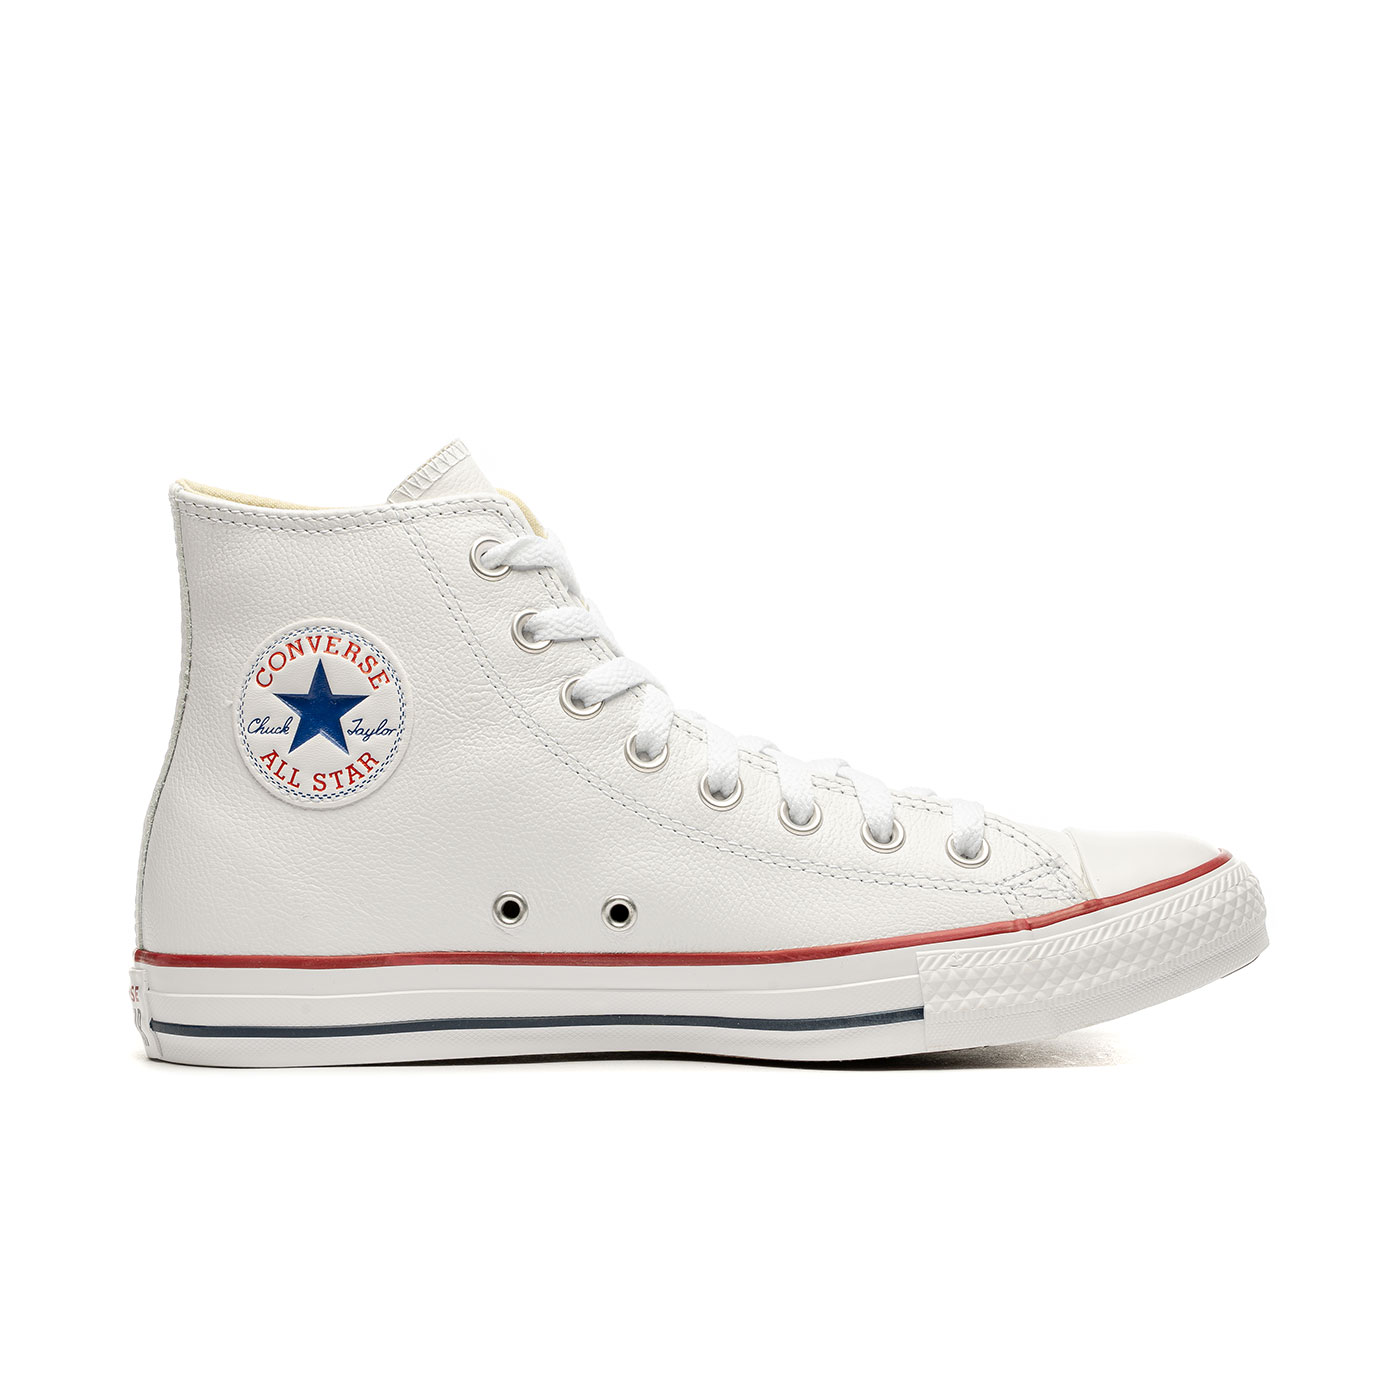 Sneakers CONVERSE Chuck Taylor All Star Hi Leather White for Unisex ...